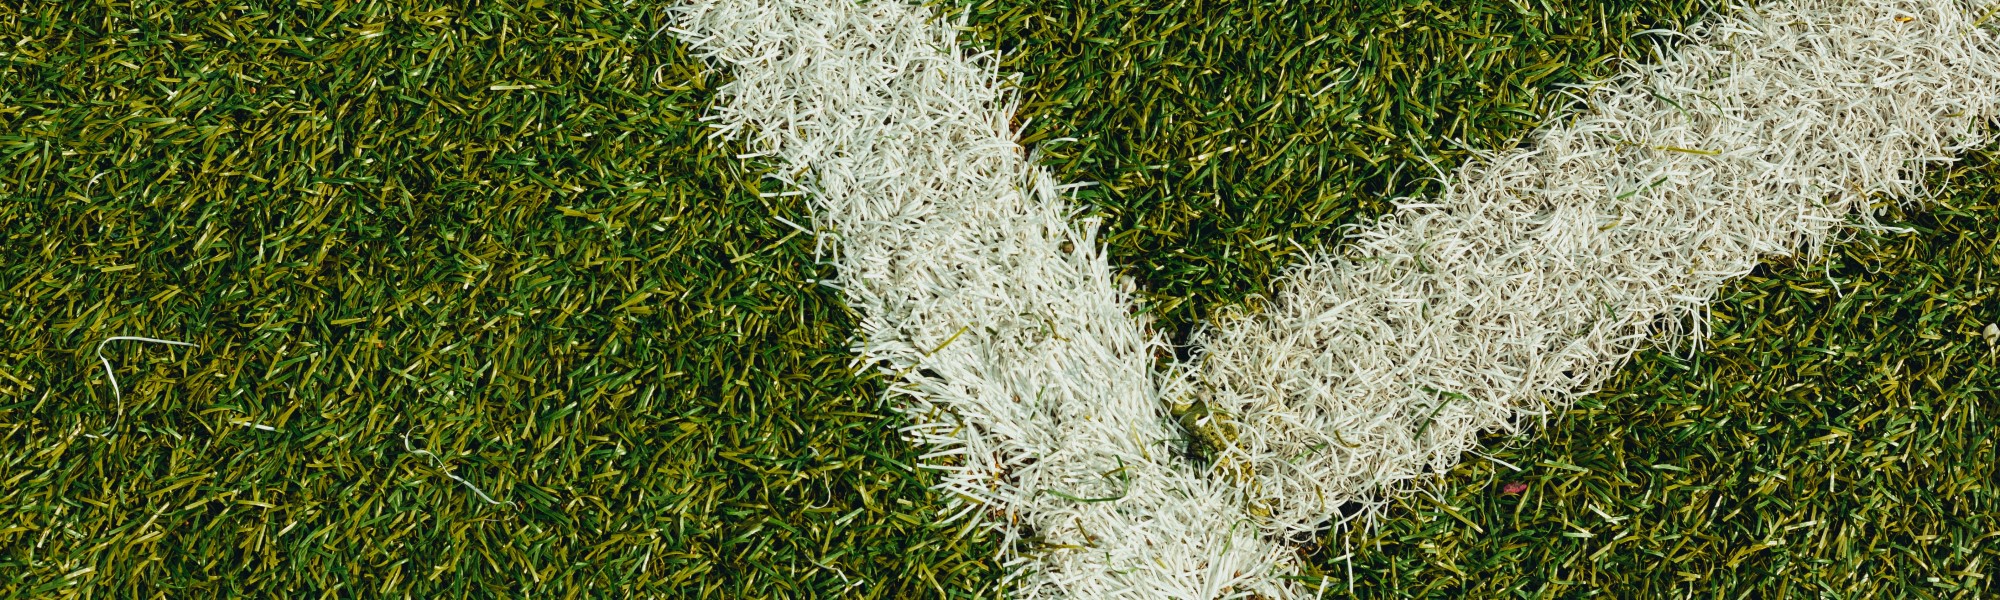 football field grass and white lines